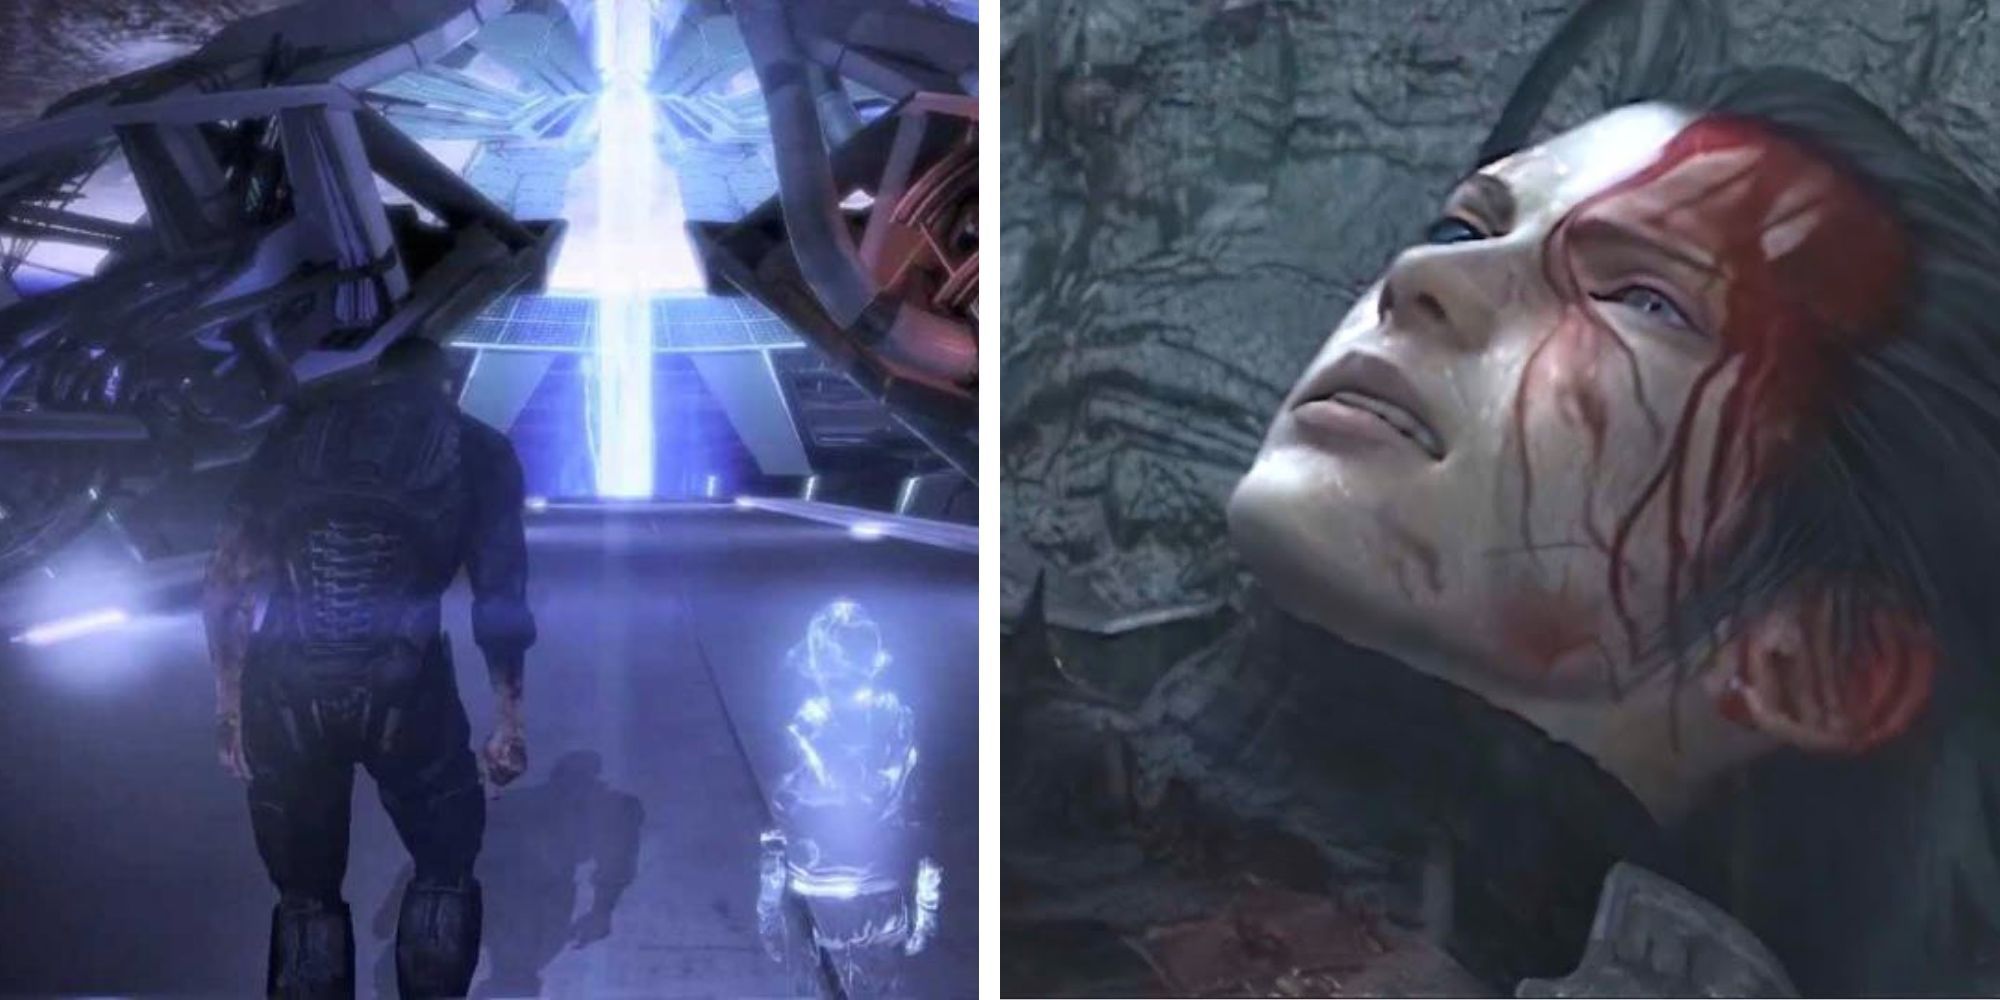 Split image of Shepherd and Zack from mass effect and final fantasy crisis core